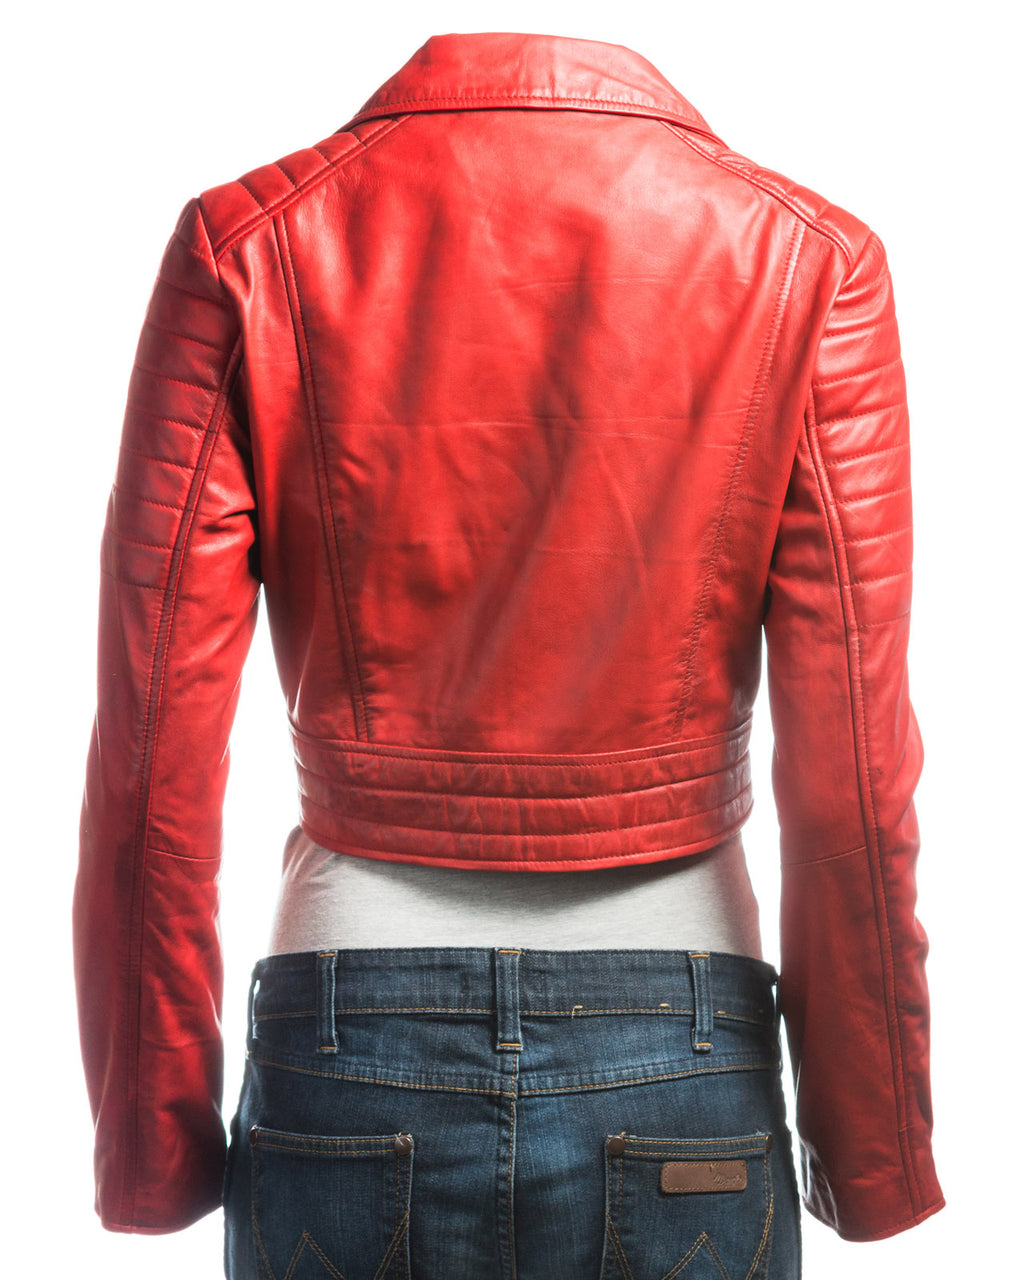 Ladies Red Cropped Leather Biker Style Jacket: Concetta